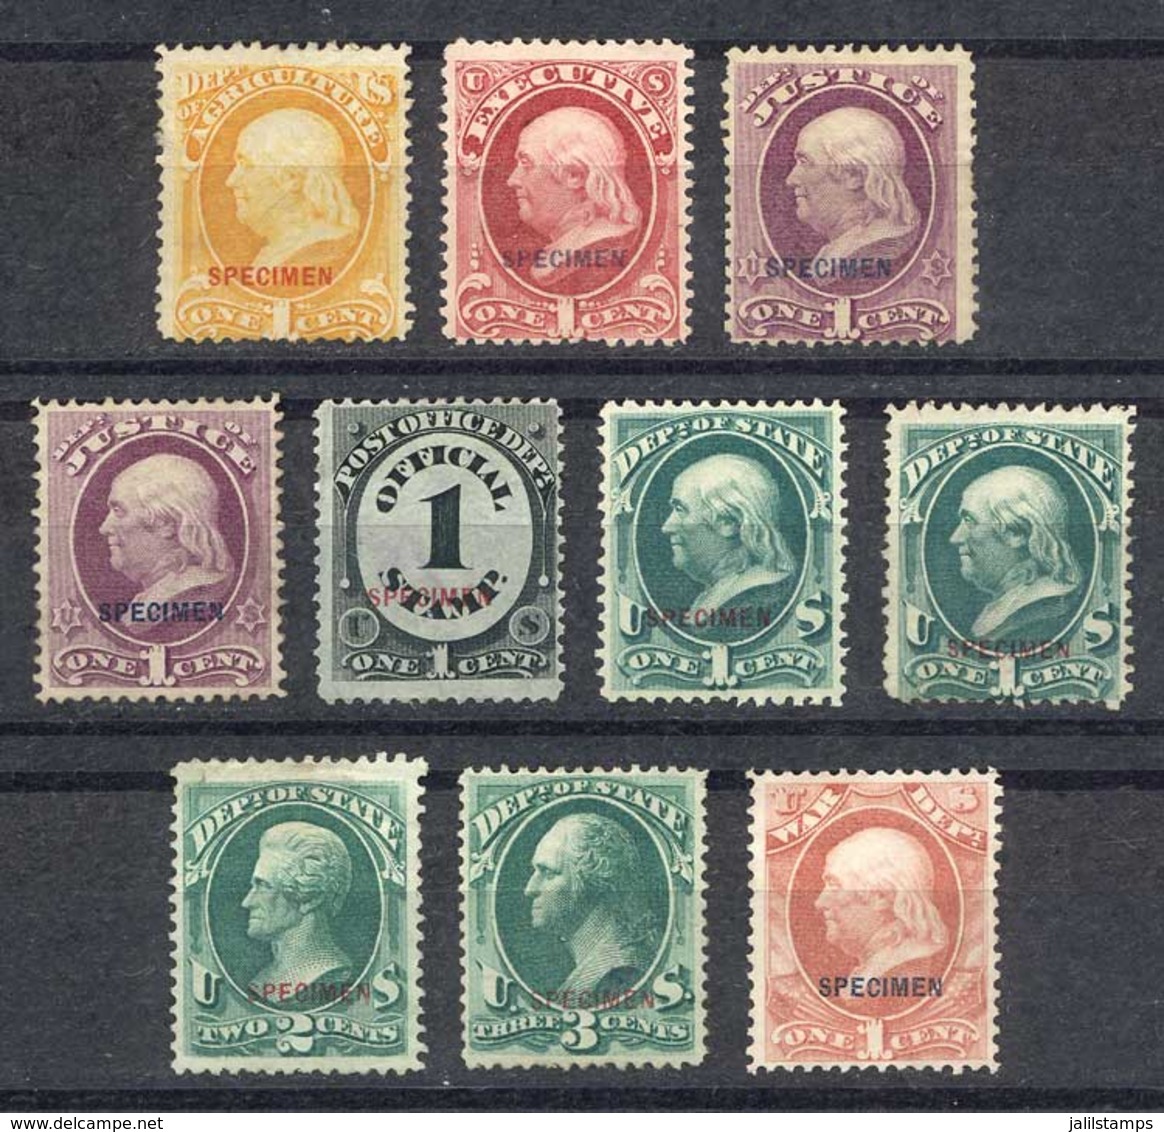 UNITED STATES: Sc.O1S And Following, Lot Of Official Stamps Overprinted SPECIMEN, VF Quality, Catalog Value US$500+ - Service